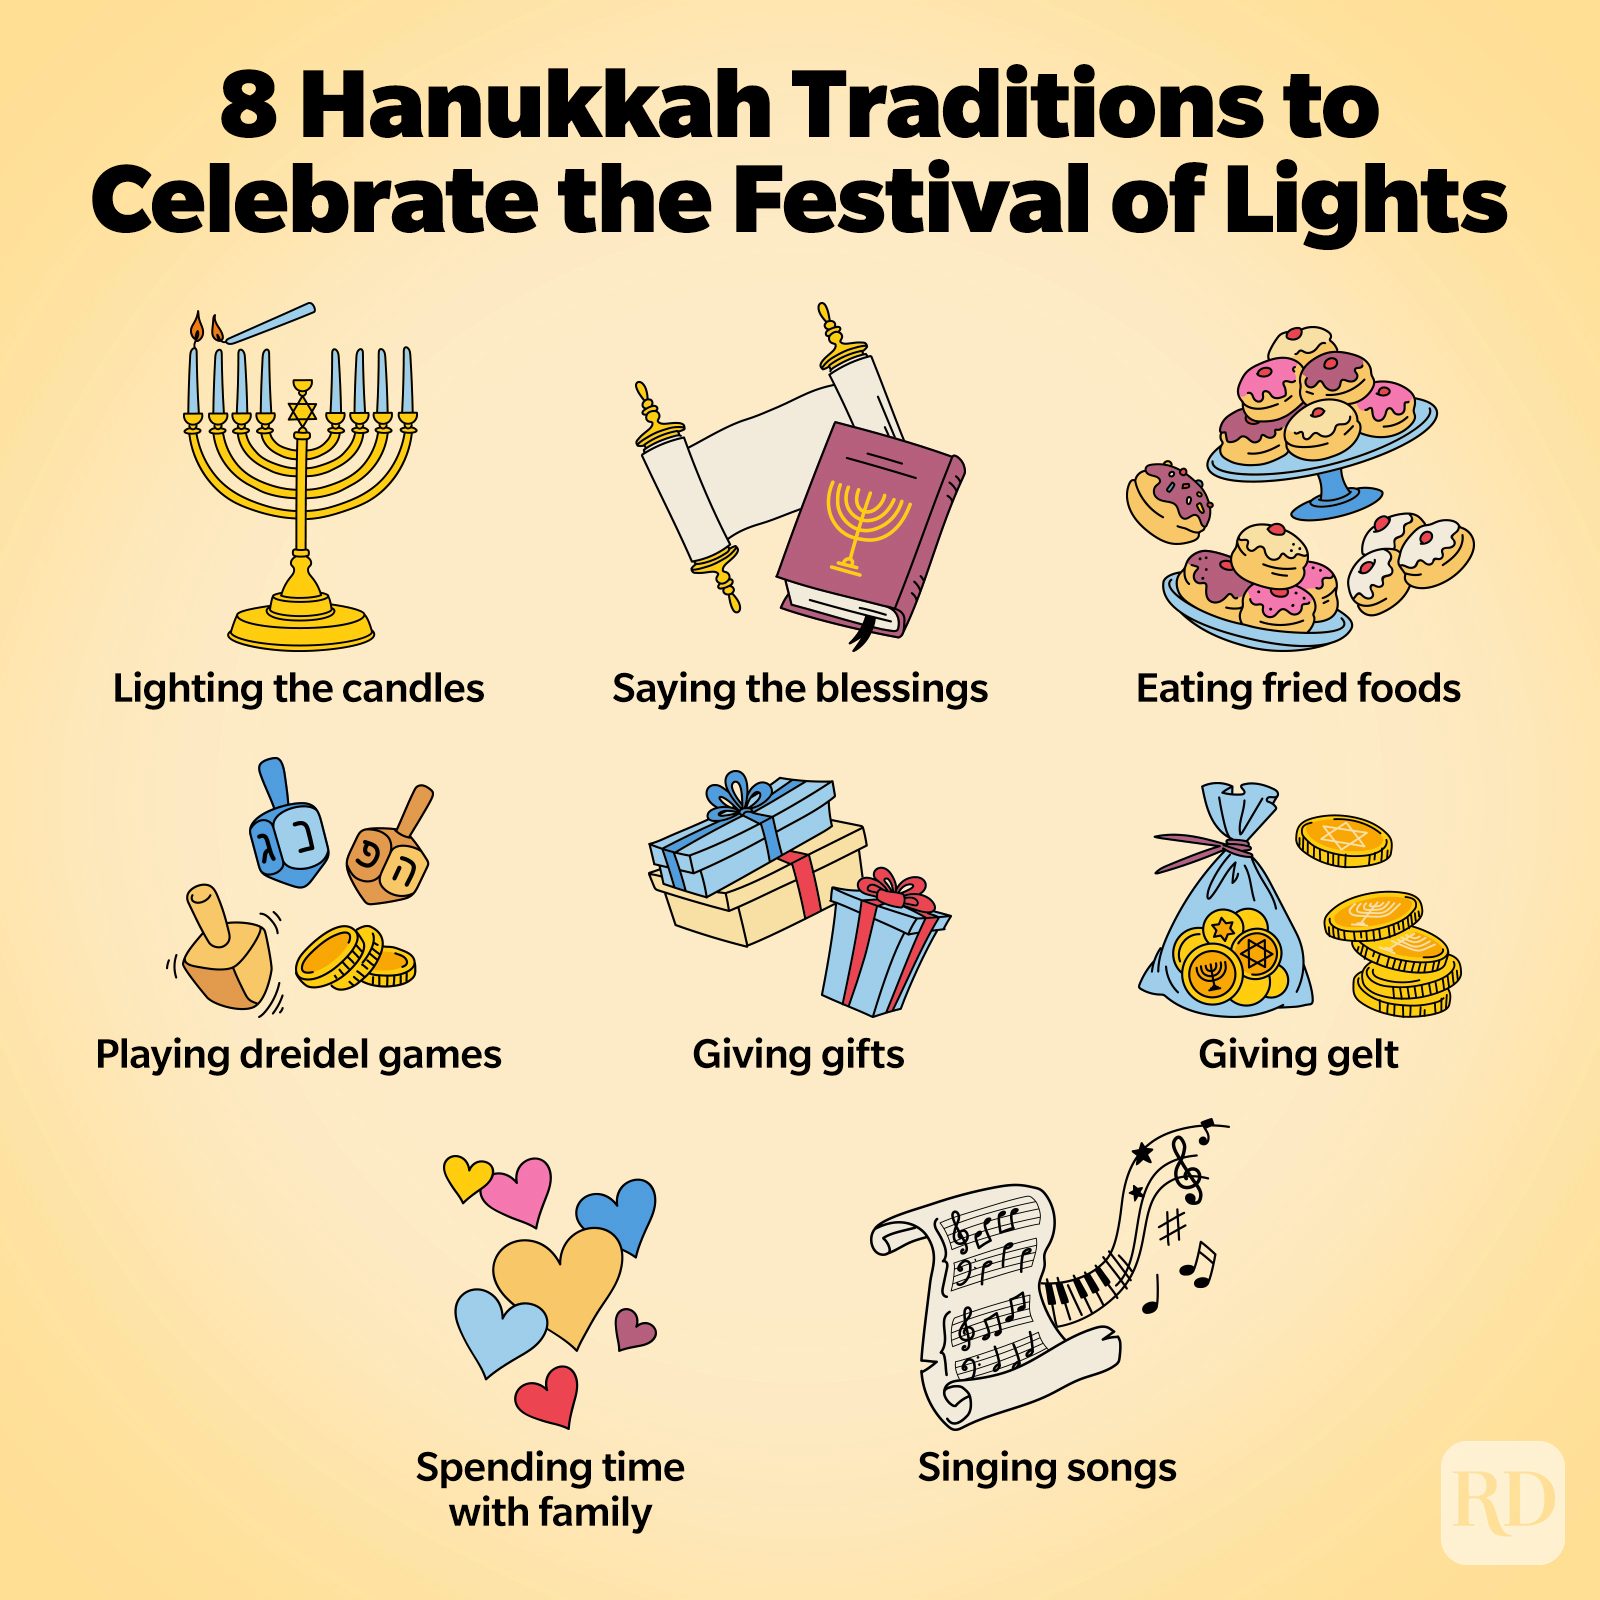 https://www.rd.com/wp-content/uploads/2022/11/8-Hanukkah-Traditions-GettyImages3.jpg?fit=680%2C680